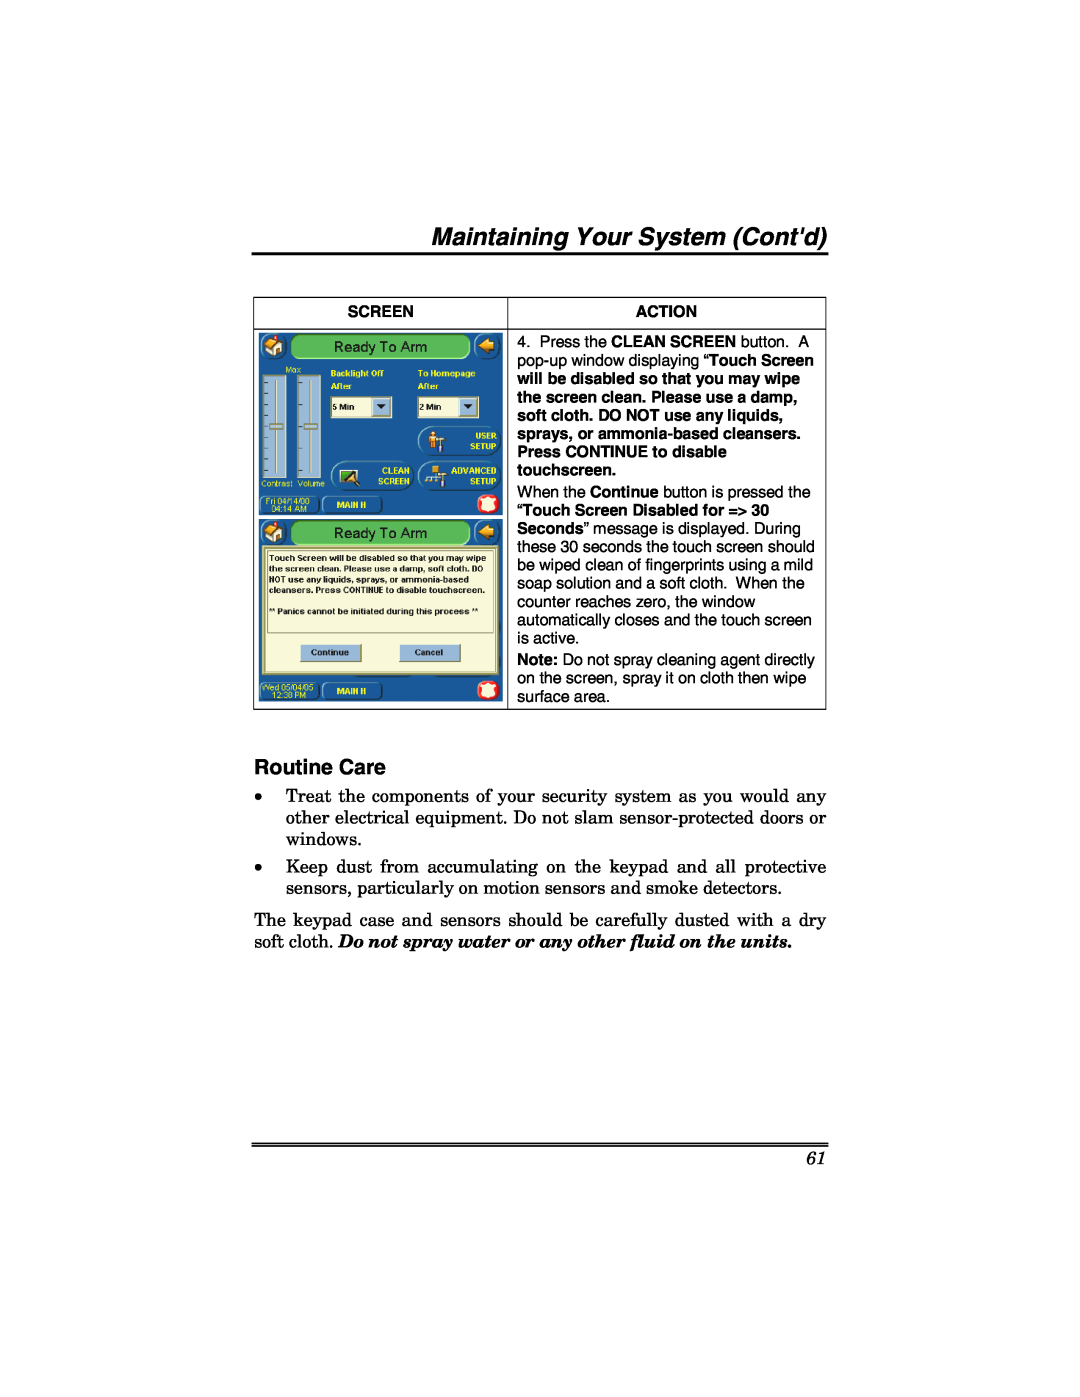 Honeywell 6271 manual Maintaining Your System Contd, Routine Care 